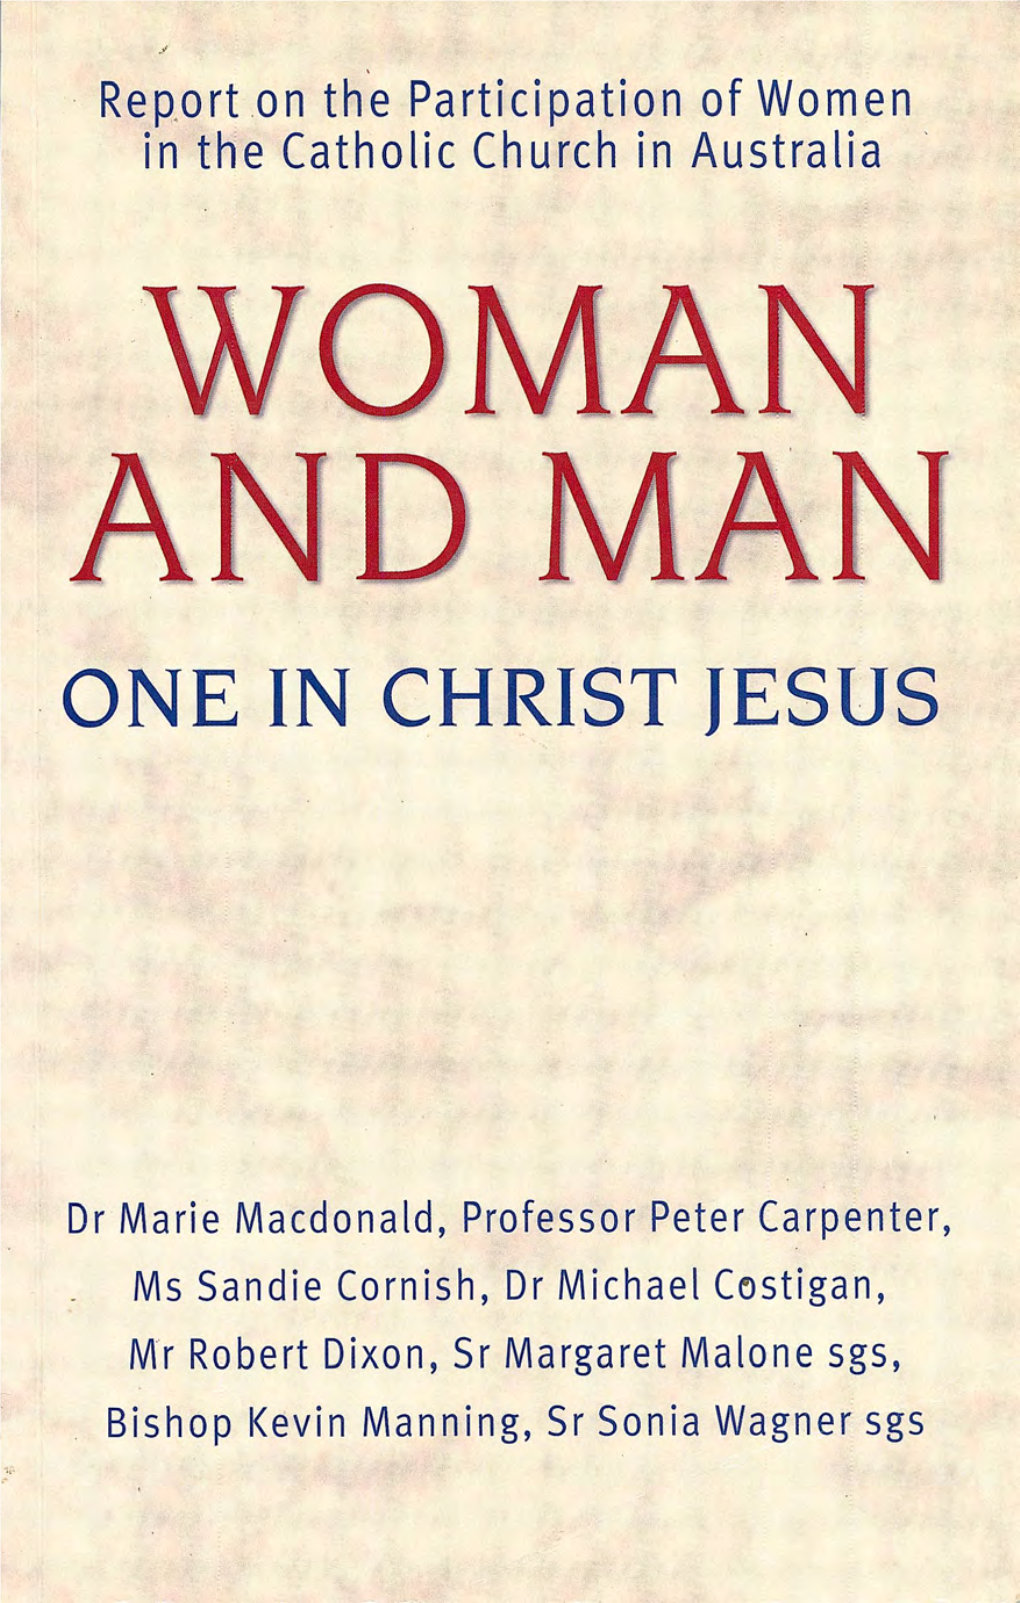 Report on the Participation of Women in the Catholic Church in Australia